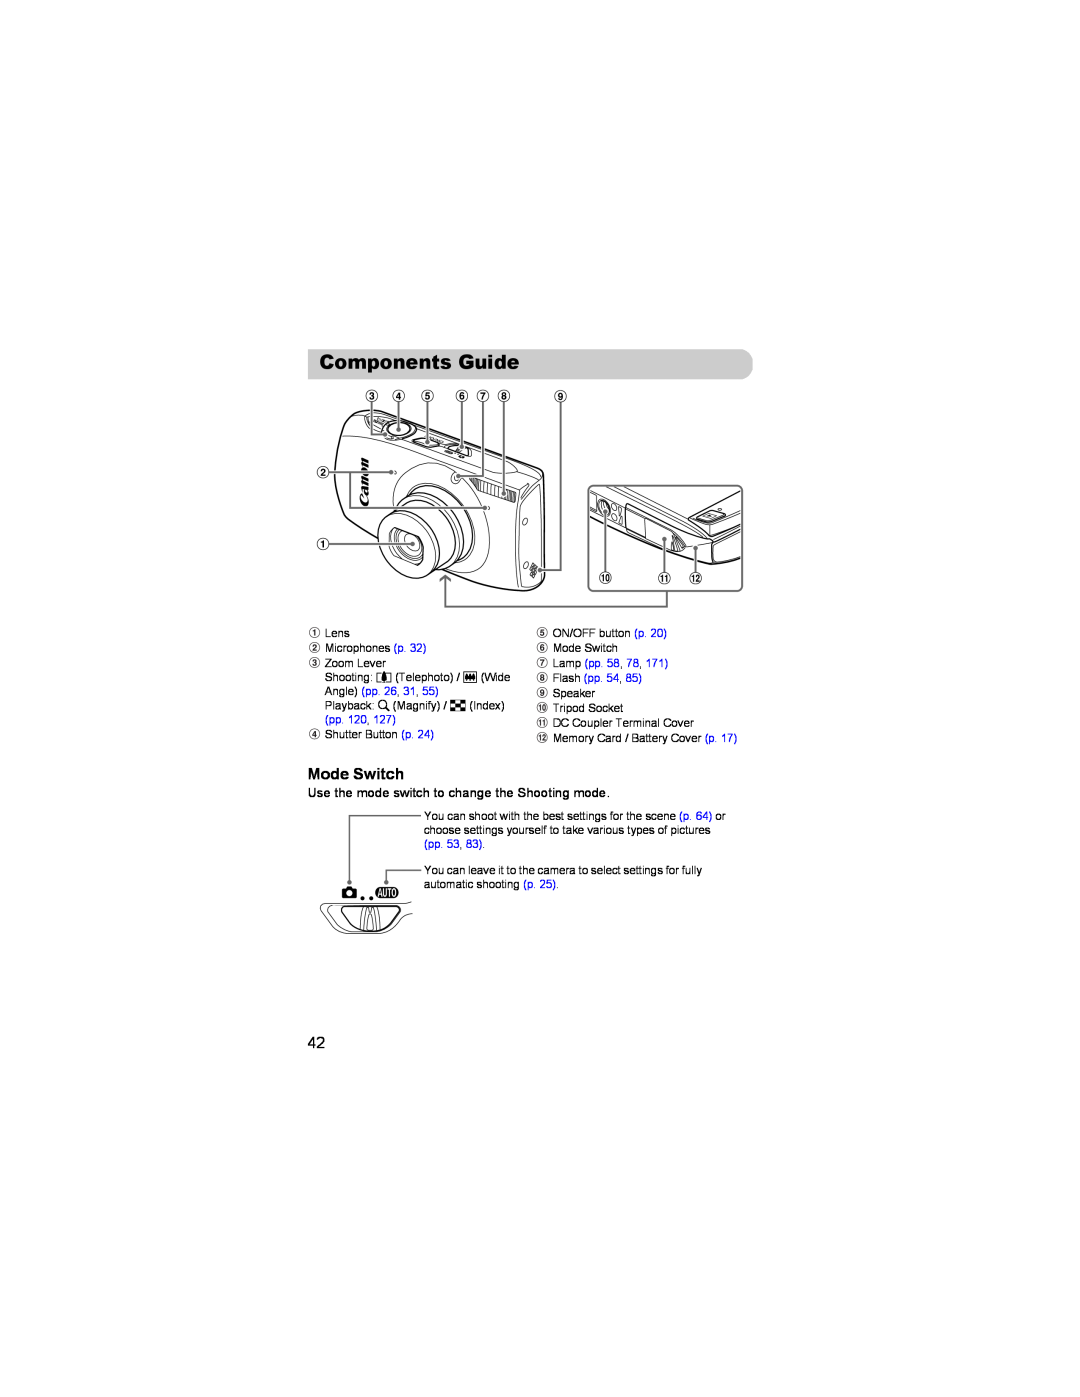 Canon 310 HS manual Components Guide, Mode Switch 